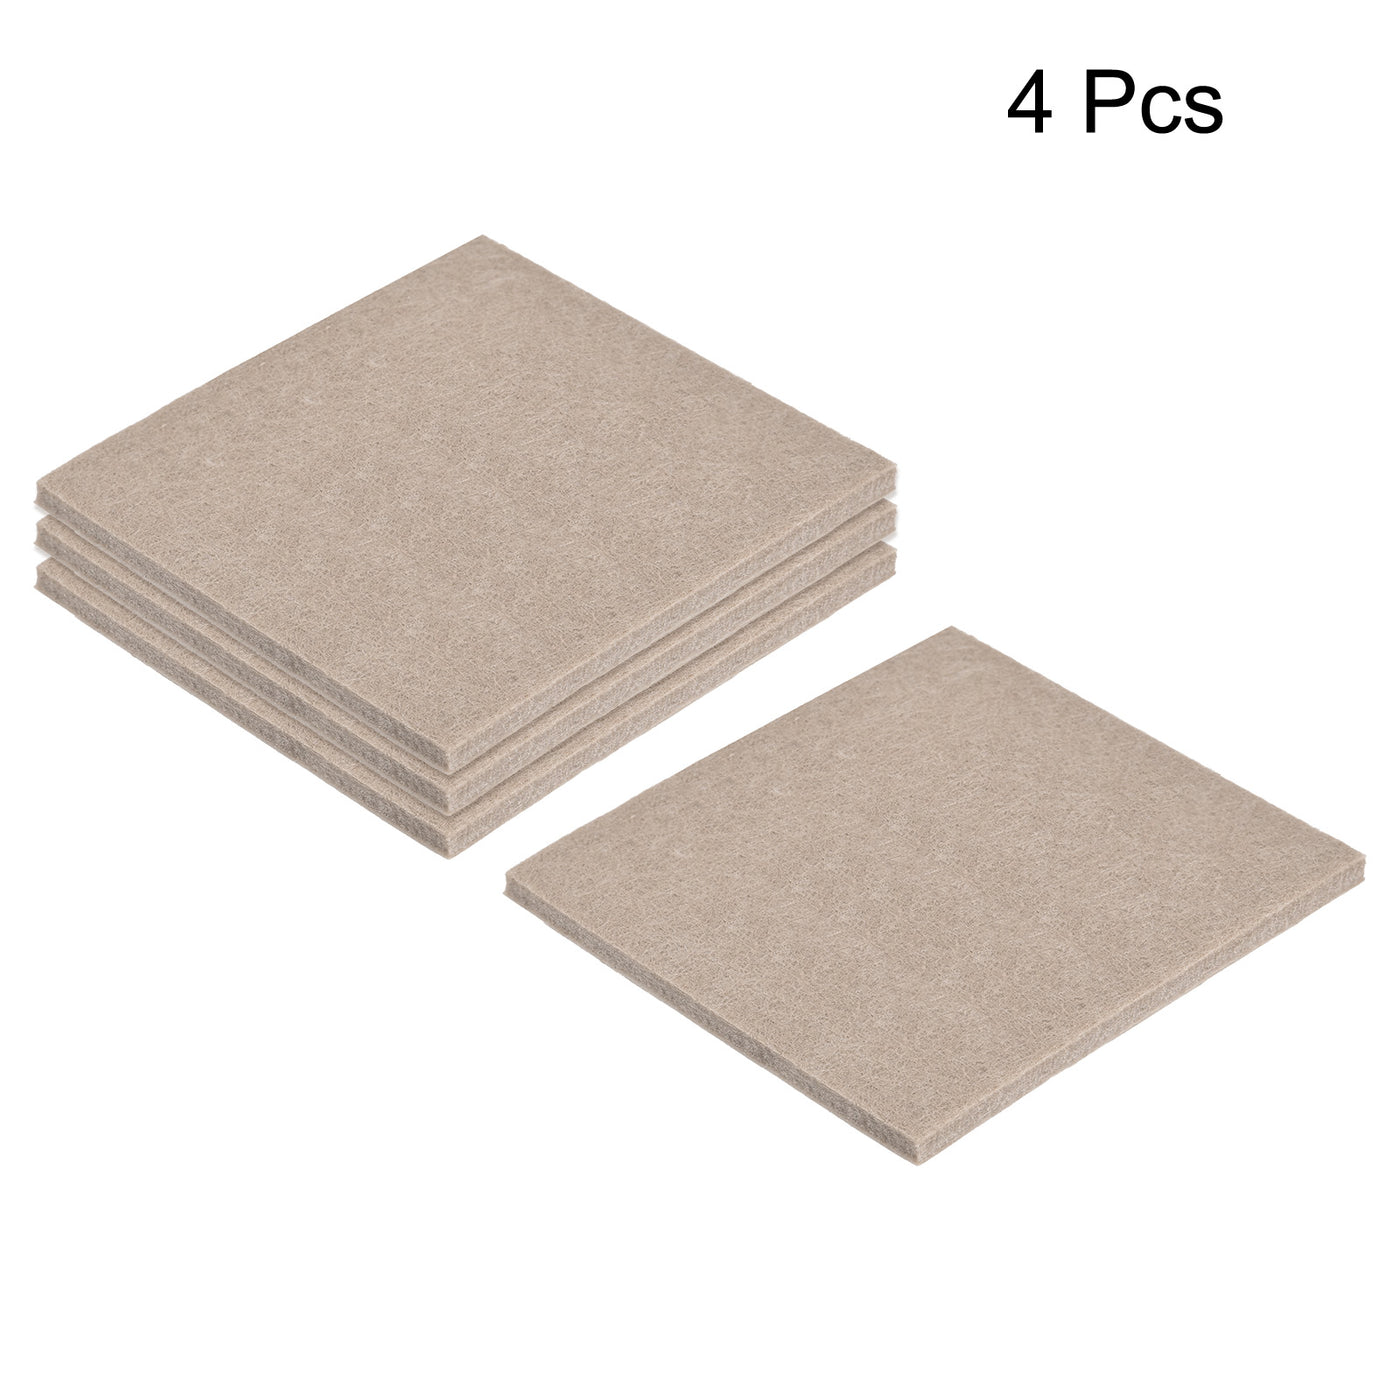 uxcell Uxcell Self Adhesive Square Furniture Felt Pads for Hardwood Tiles Self-adhesive